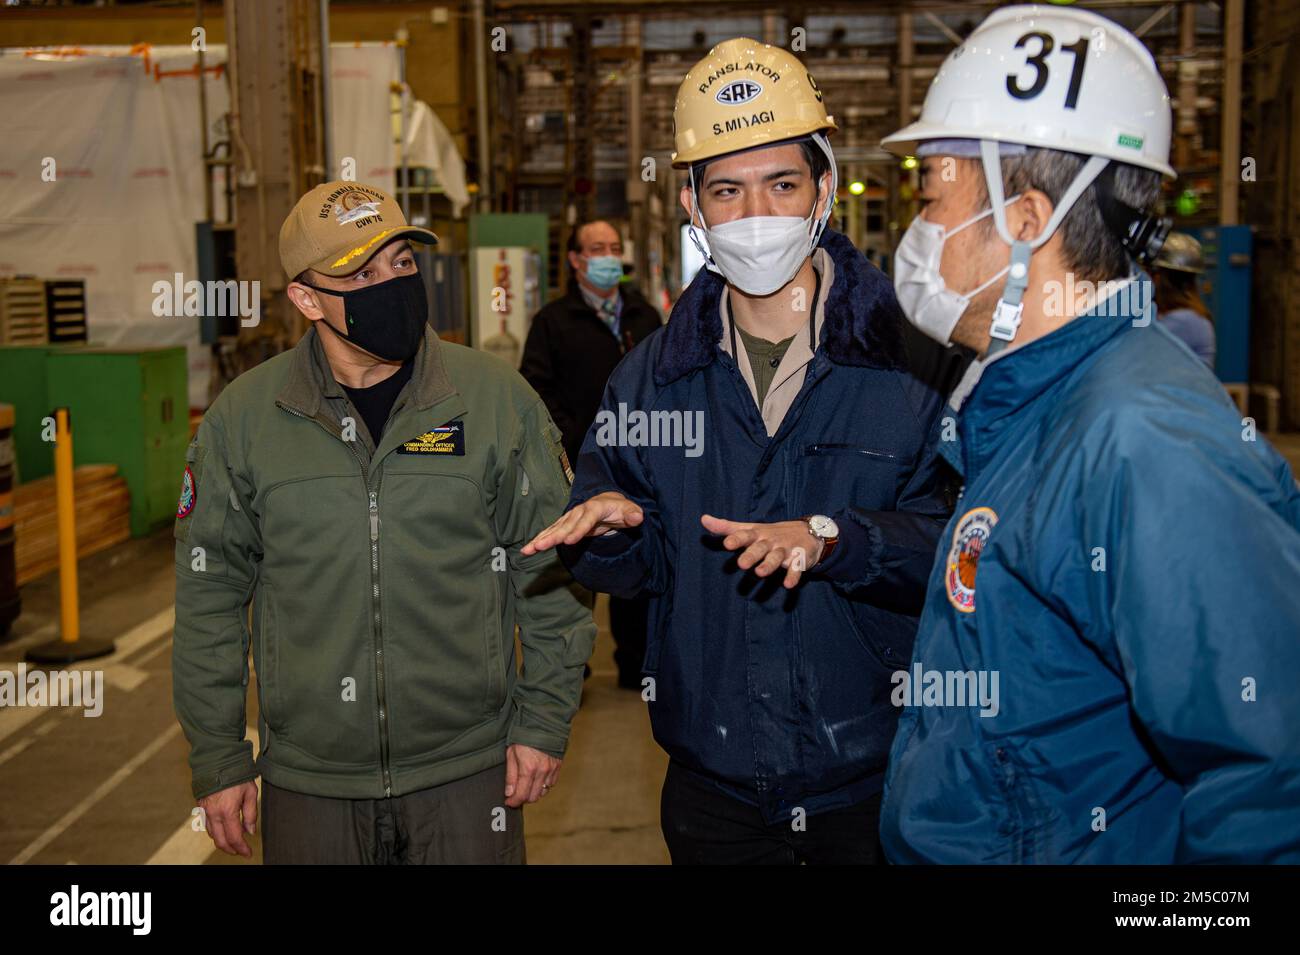 220225-N-SI601-1075 YOKOSUKA, Japan (Feb. 25, 2022) Capt. Fred Goldhammer, commanding officer of the U.S. Navy’s only forward-deployed aircraft carrier USS Ronald Reagan (CVN 76), receives a tour of a warehouse onboard Commander, Fleet Activities Yokosuka. Ronald Reagan, the flagship of Carrier Strike Group 5, provides a combat-ready force that protects and defends the United States, and supports alliances, partnerships and collective maritime interests in the Indo-Pacific region. Stock Photo